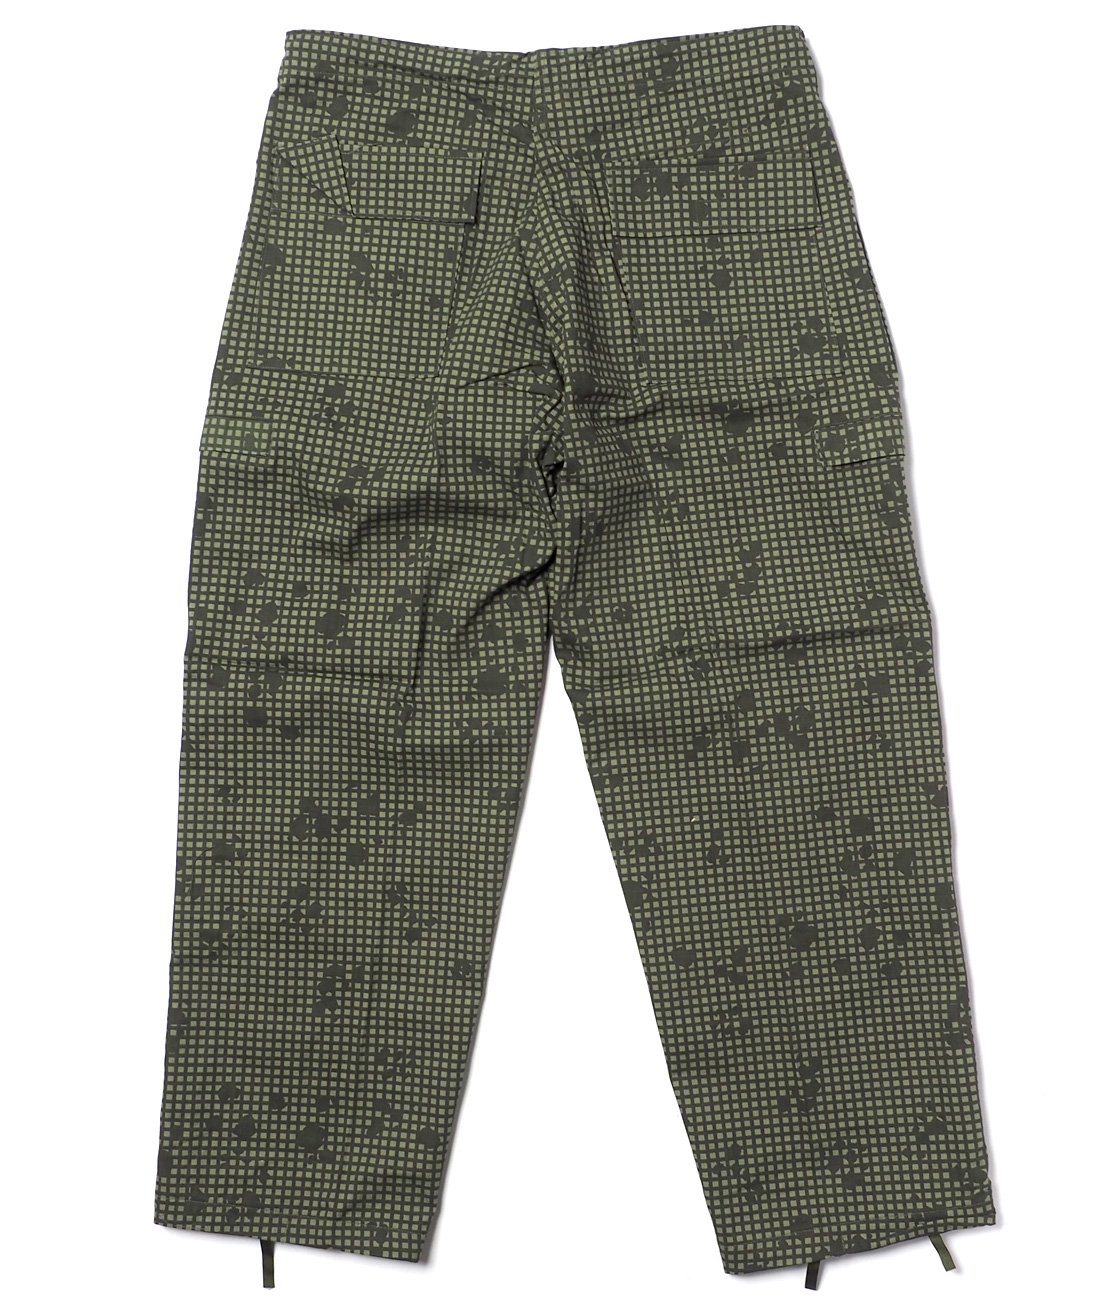 DEAD STOCK】80s US ARMY DESERT NIGHT CAMOUFLAGE TROUSERS 米軍